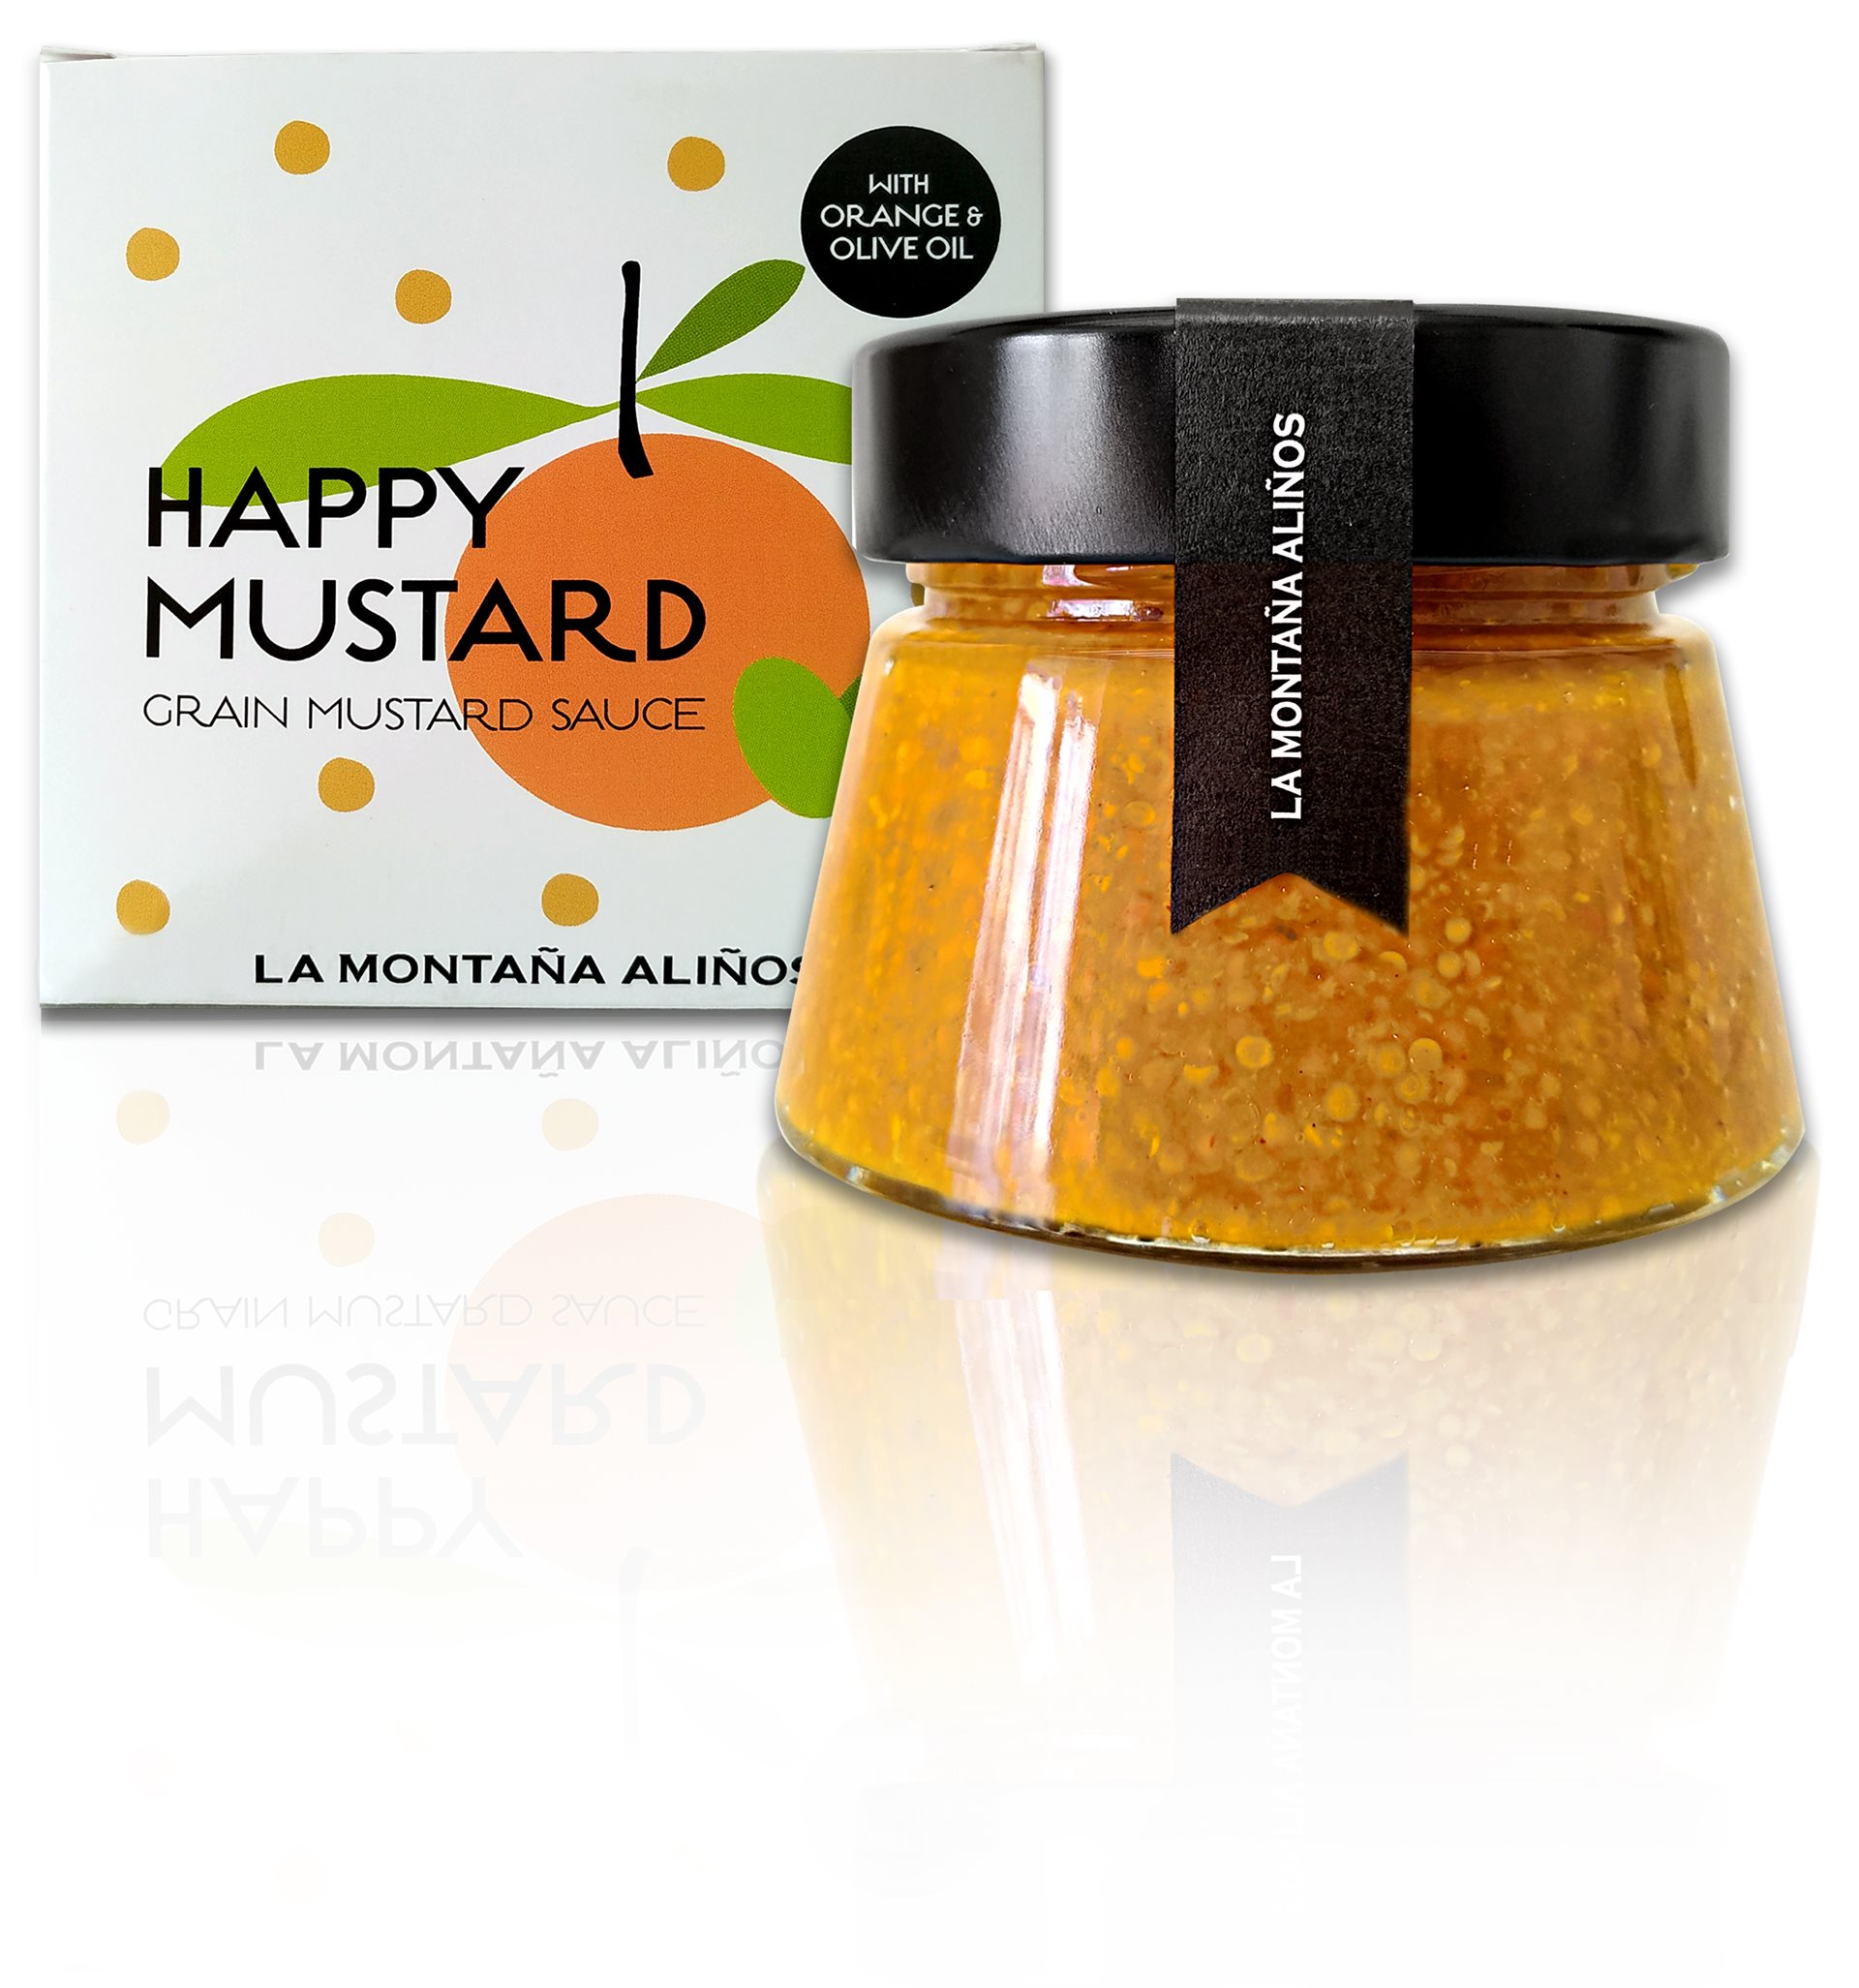 Happy Mustard: Yellow mustard grains with orange dressing and olive oil 